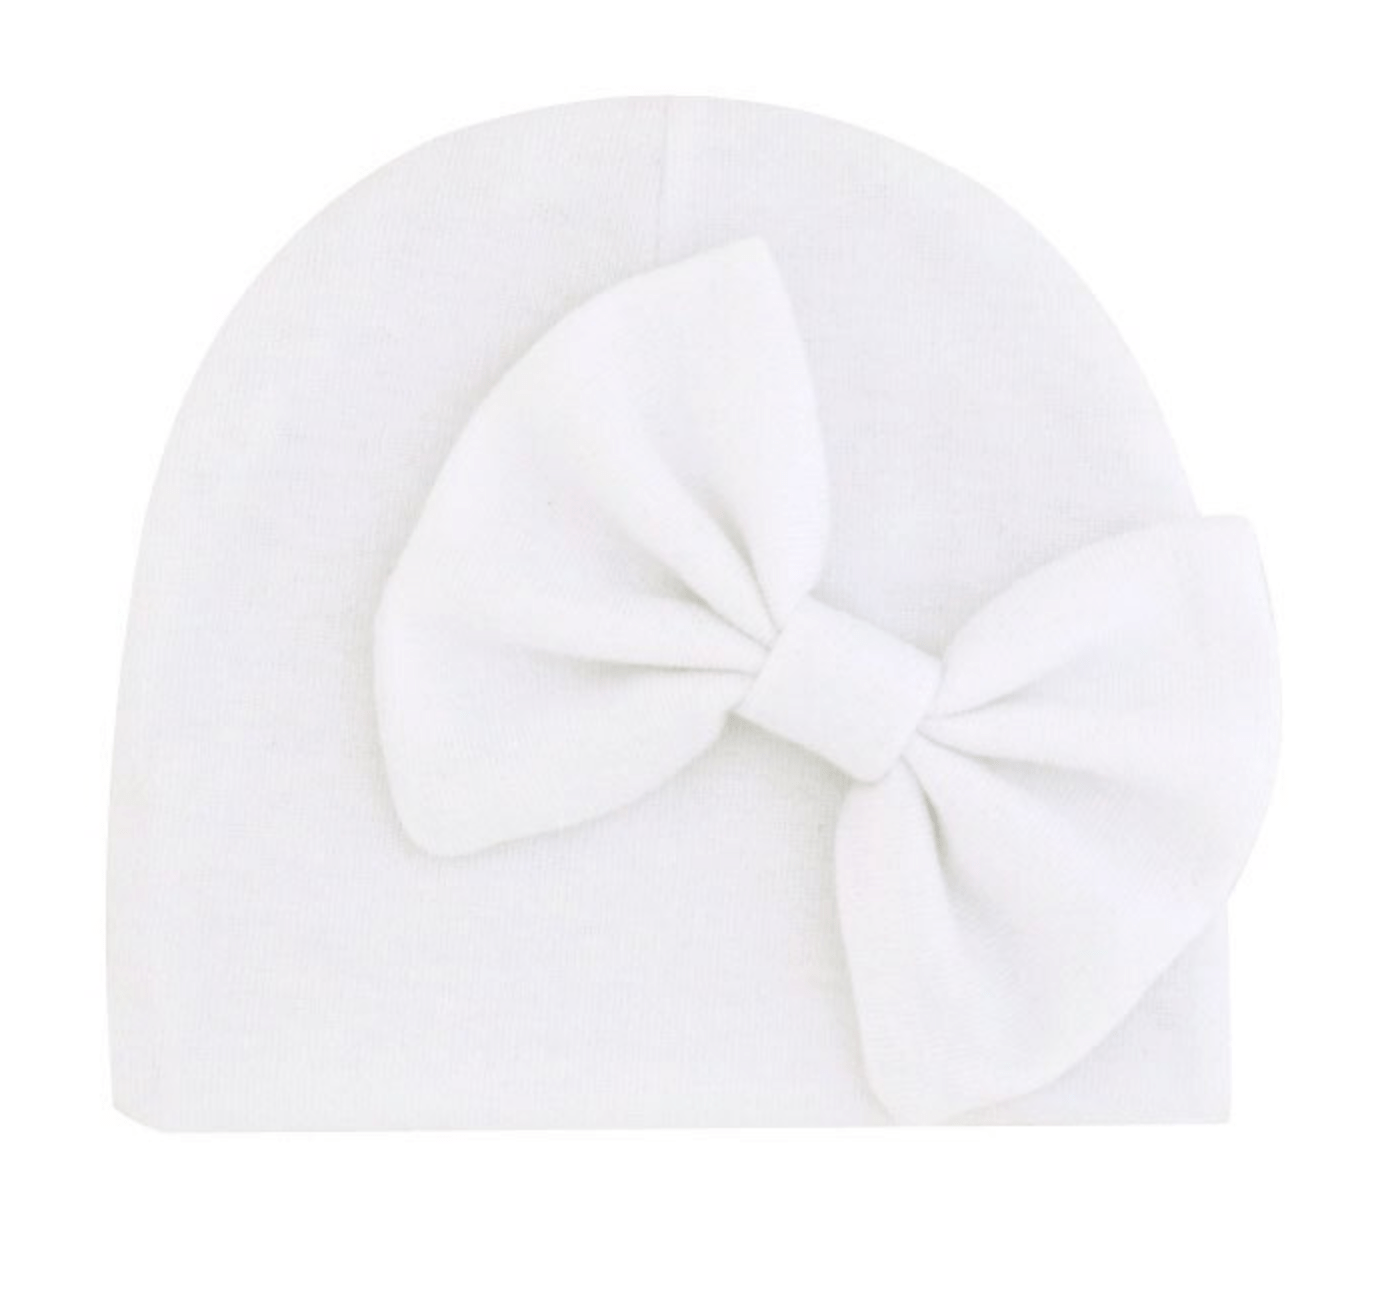 Cotton Angle Bow Hat - Twinkle Twinkle Little One